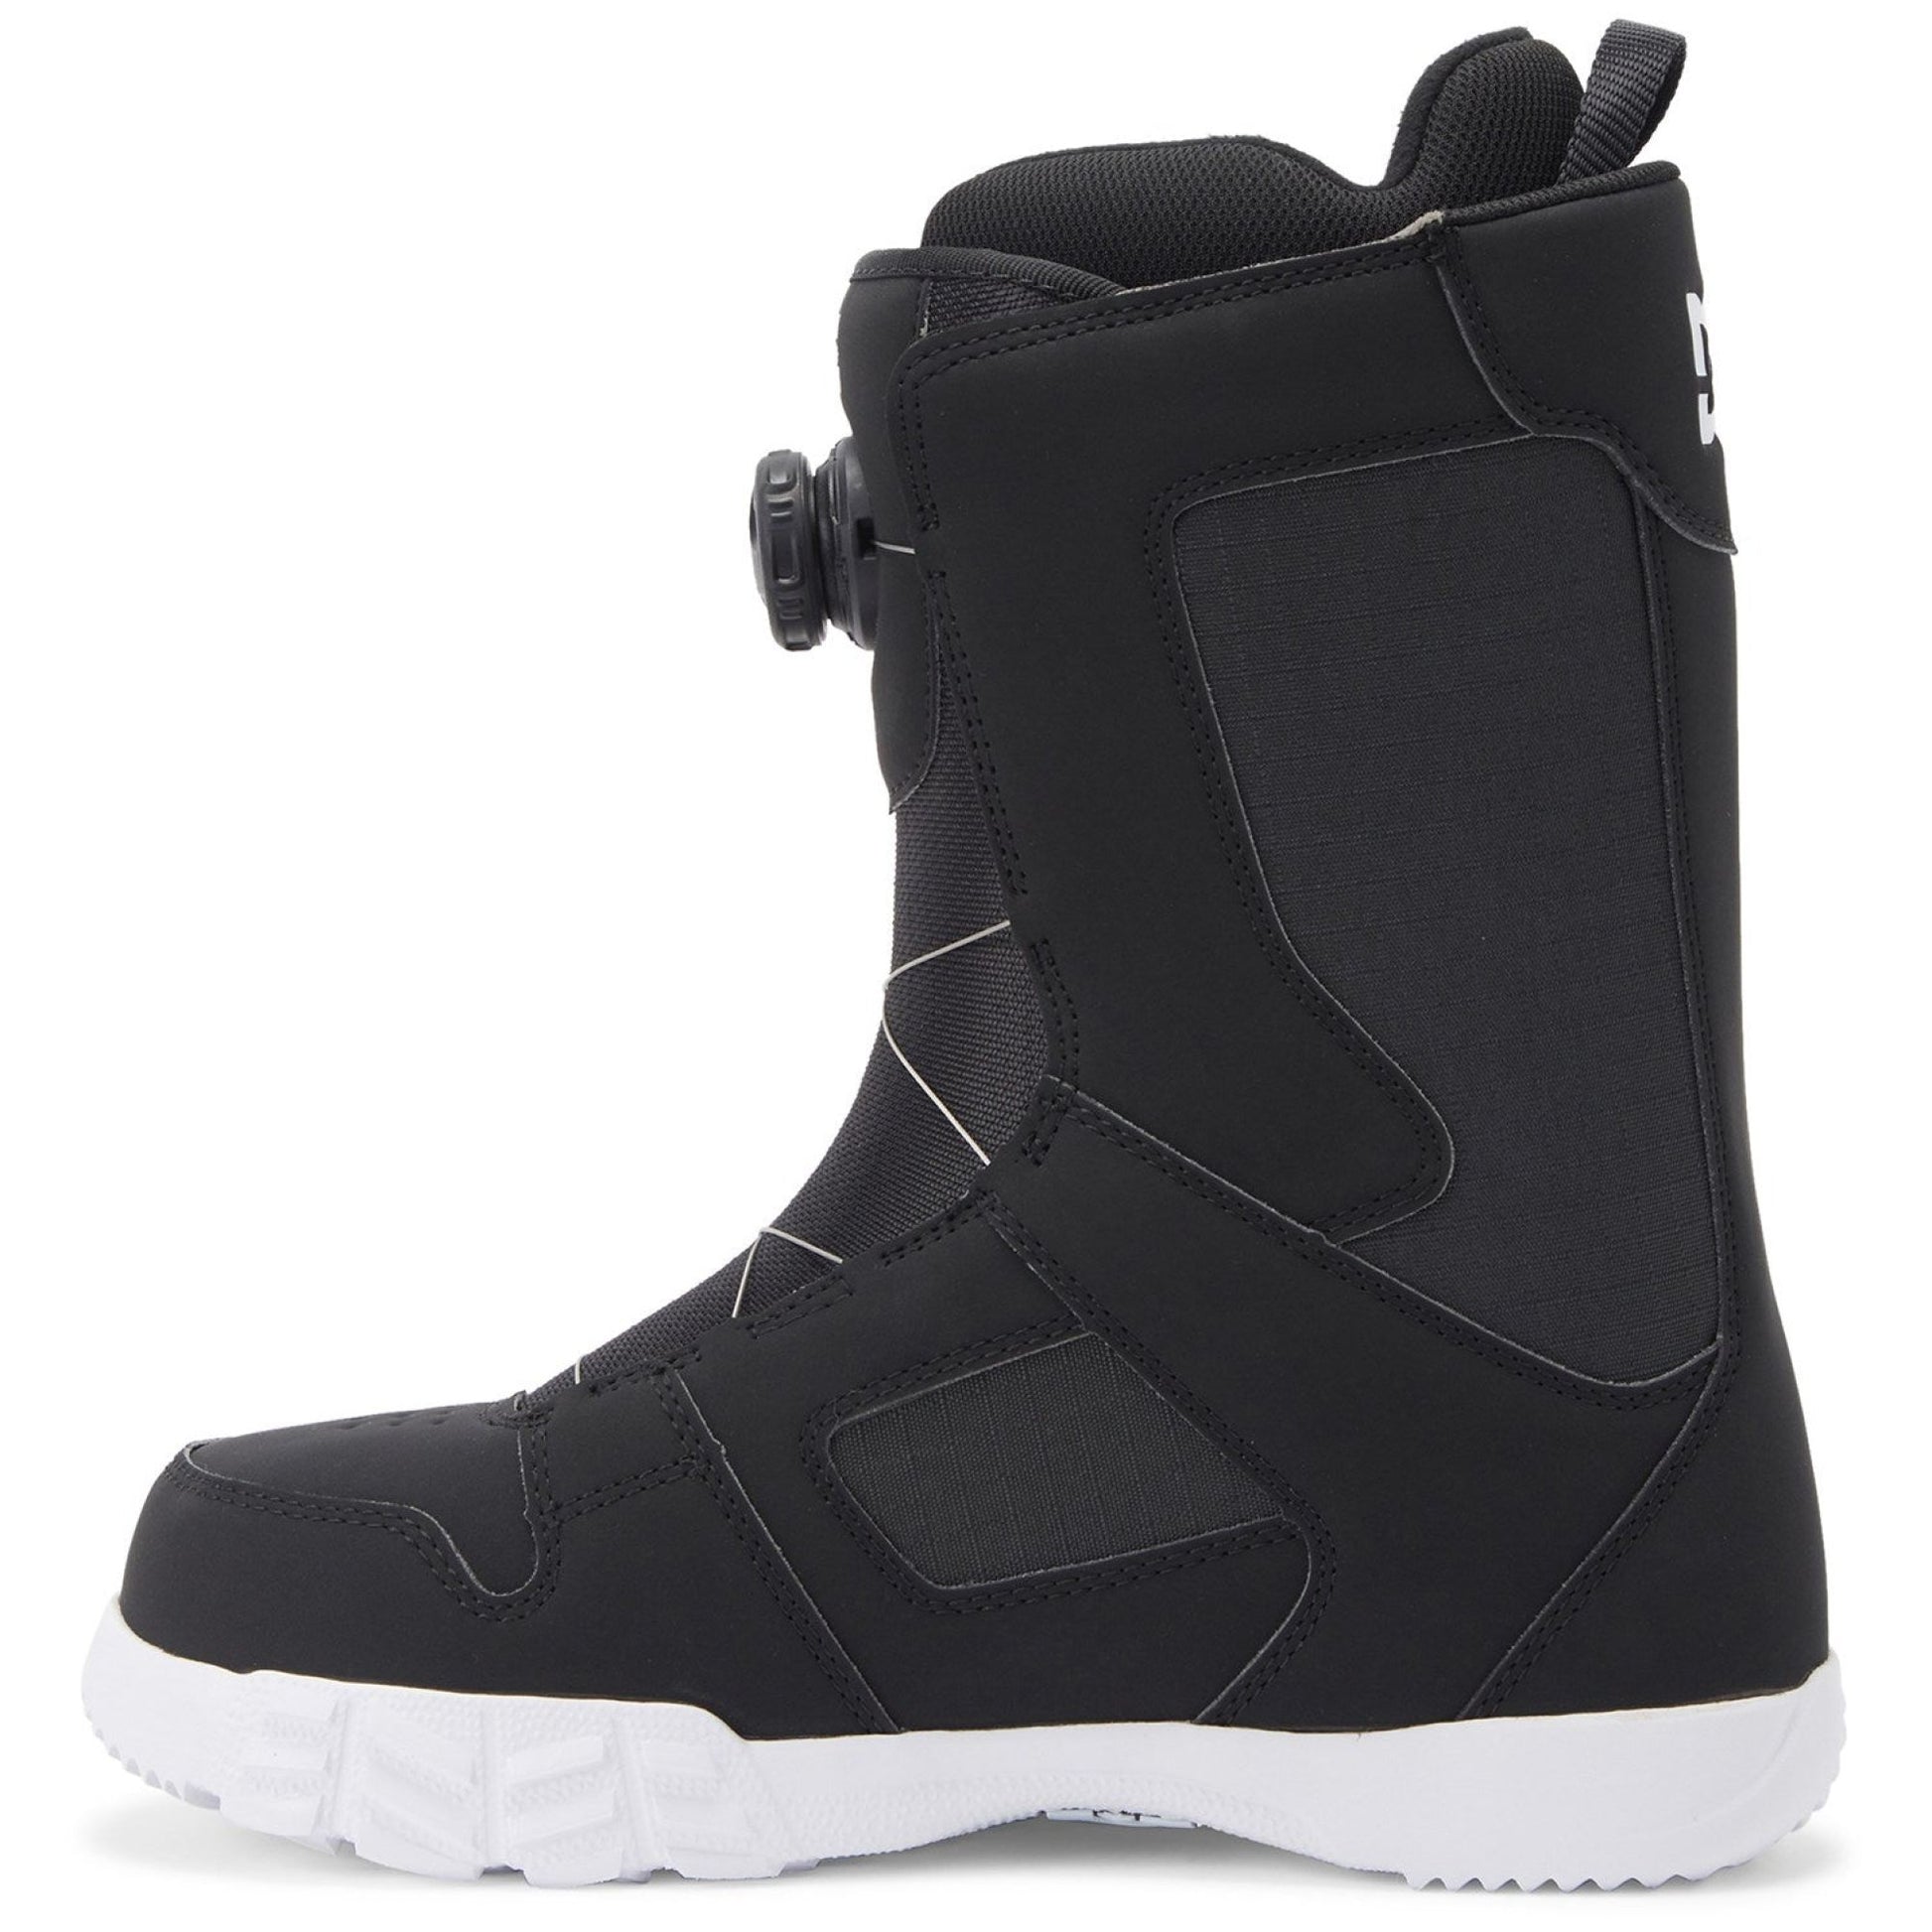 DC Phase BOA Snowboard Boots Black White Snowboard Boots